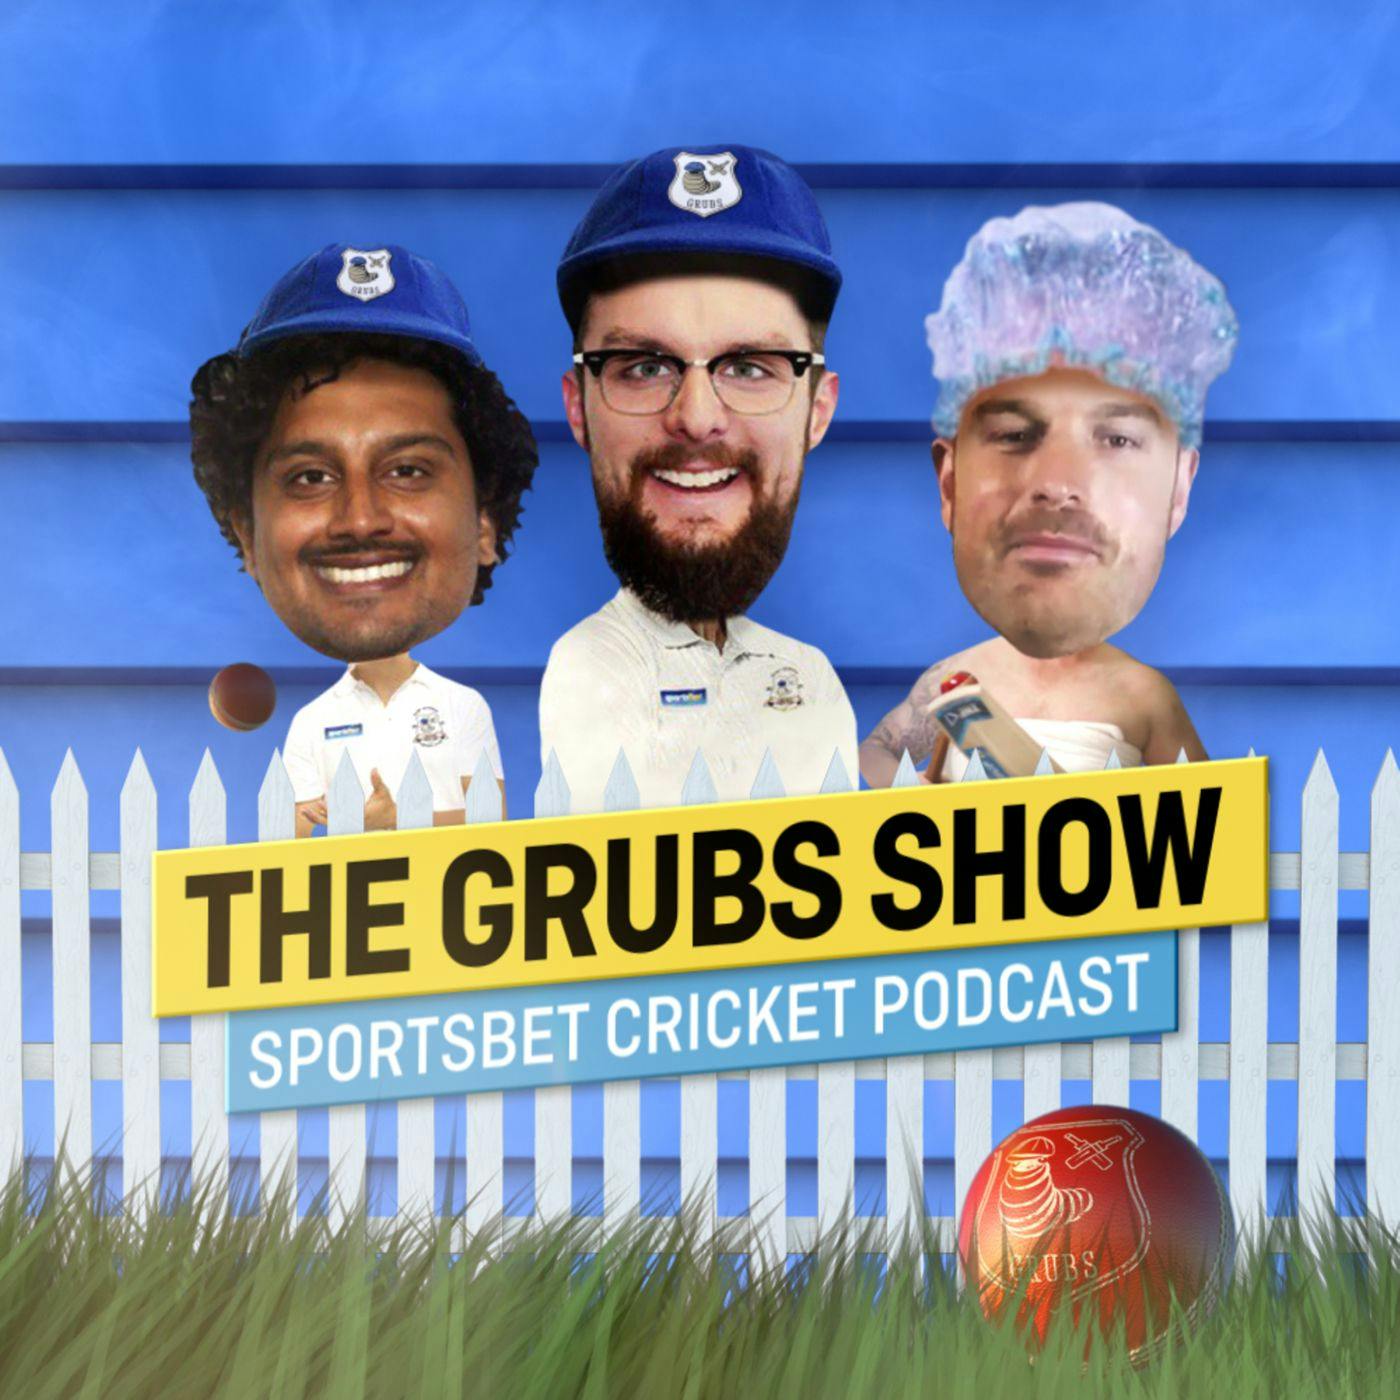 The Grubs Show - S4 E1 - We’re Back Baby!